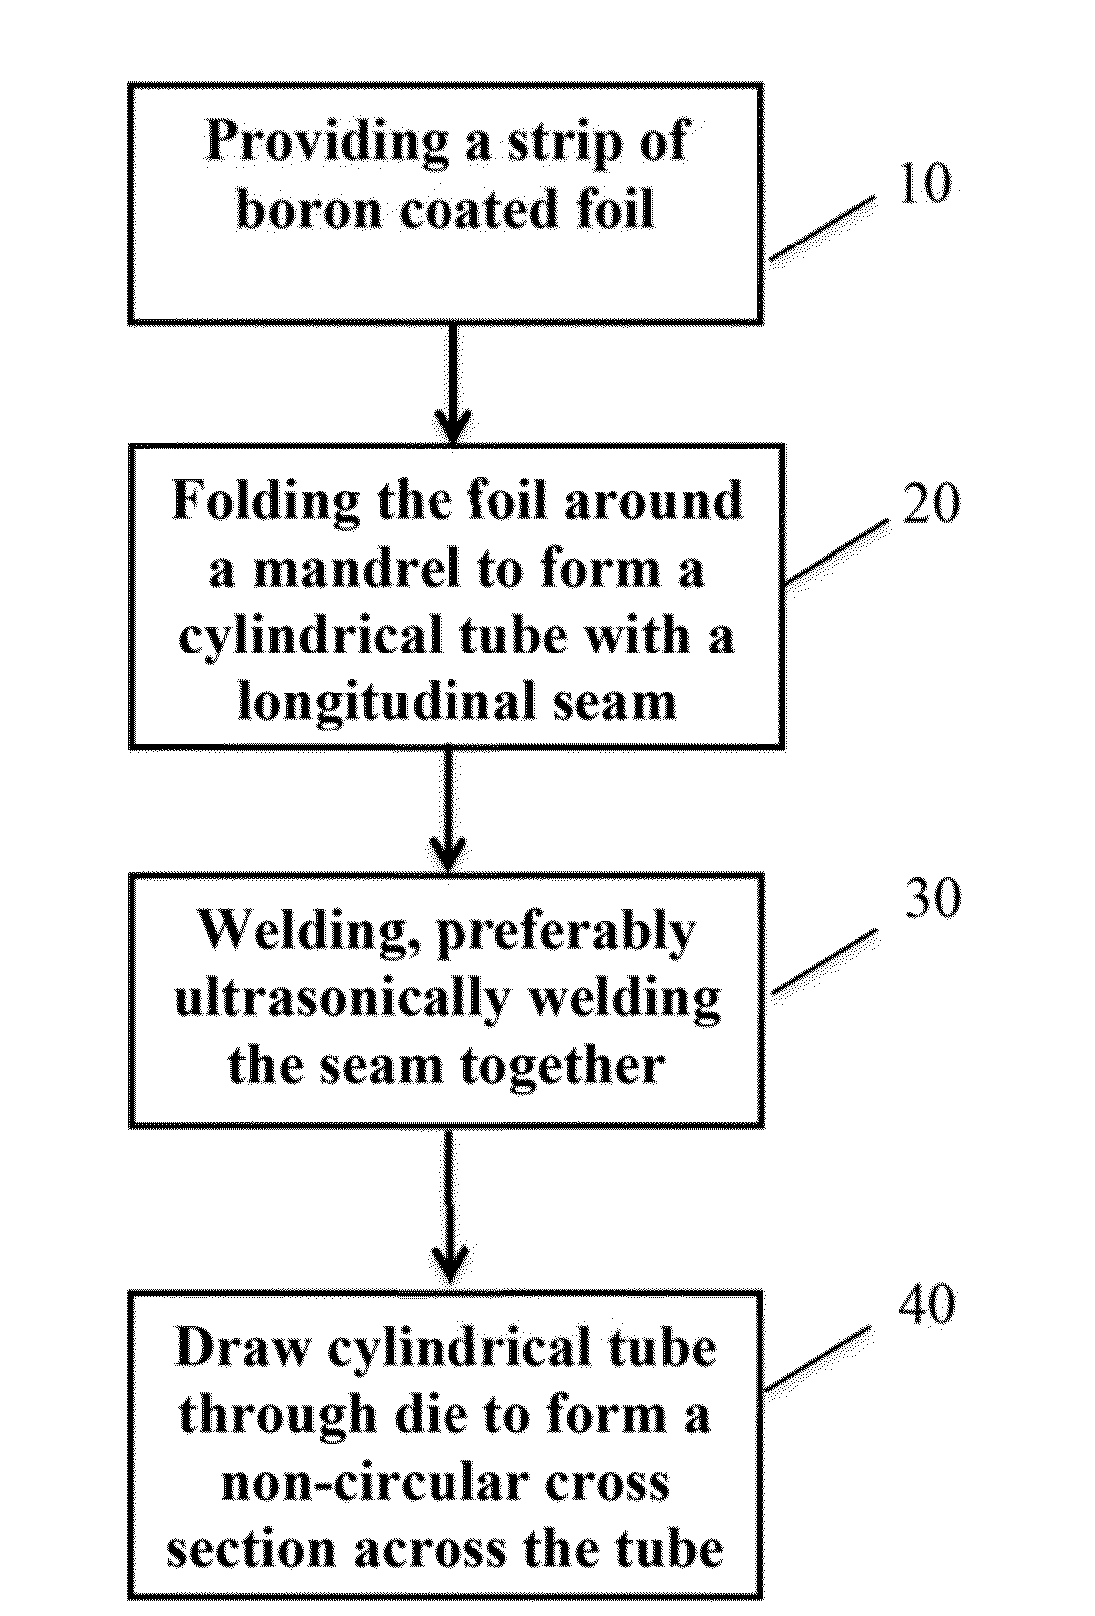 Method and Apparatus for Fabricating Boron Coated Straws for Neutron Detectors